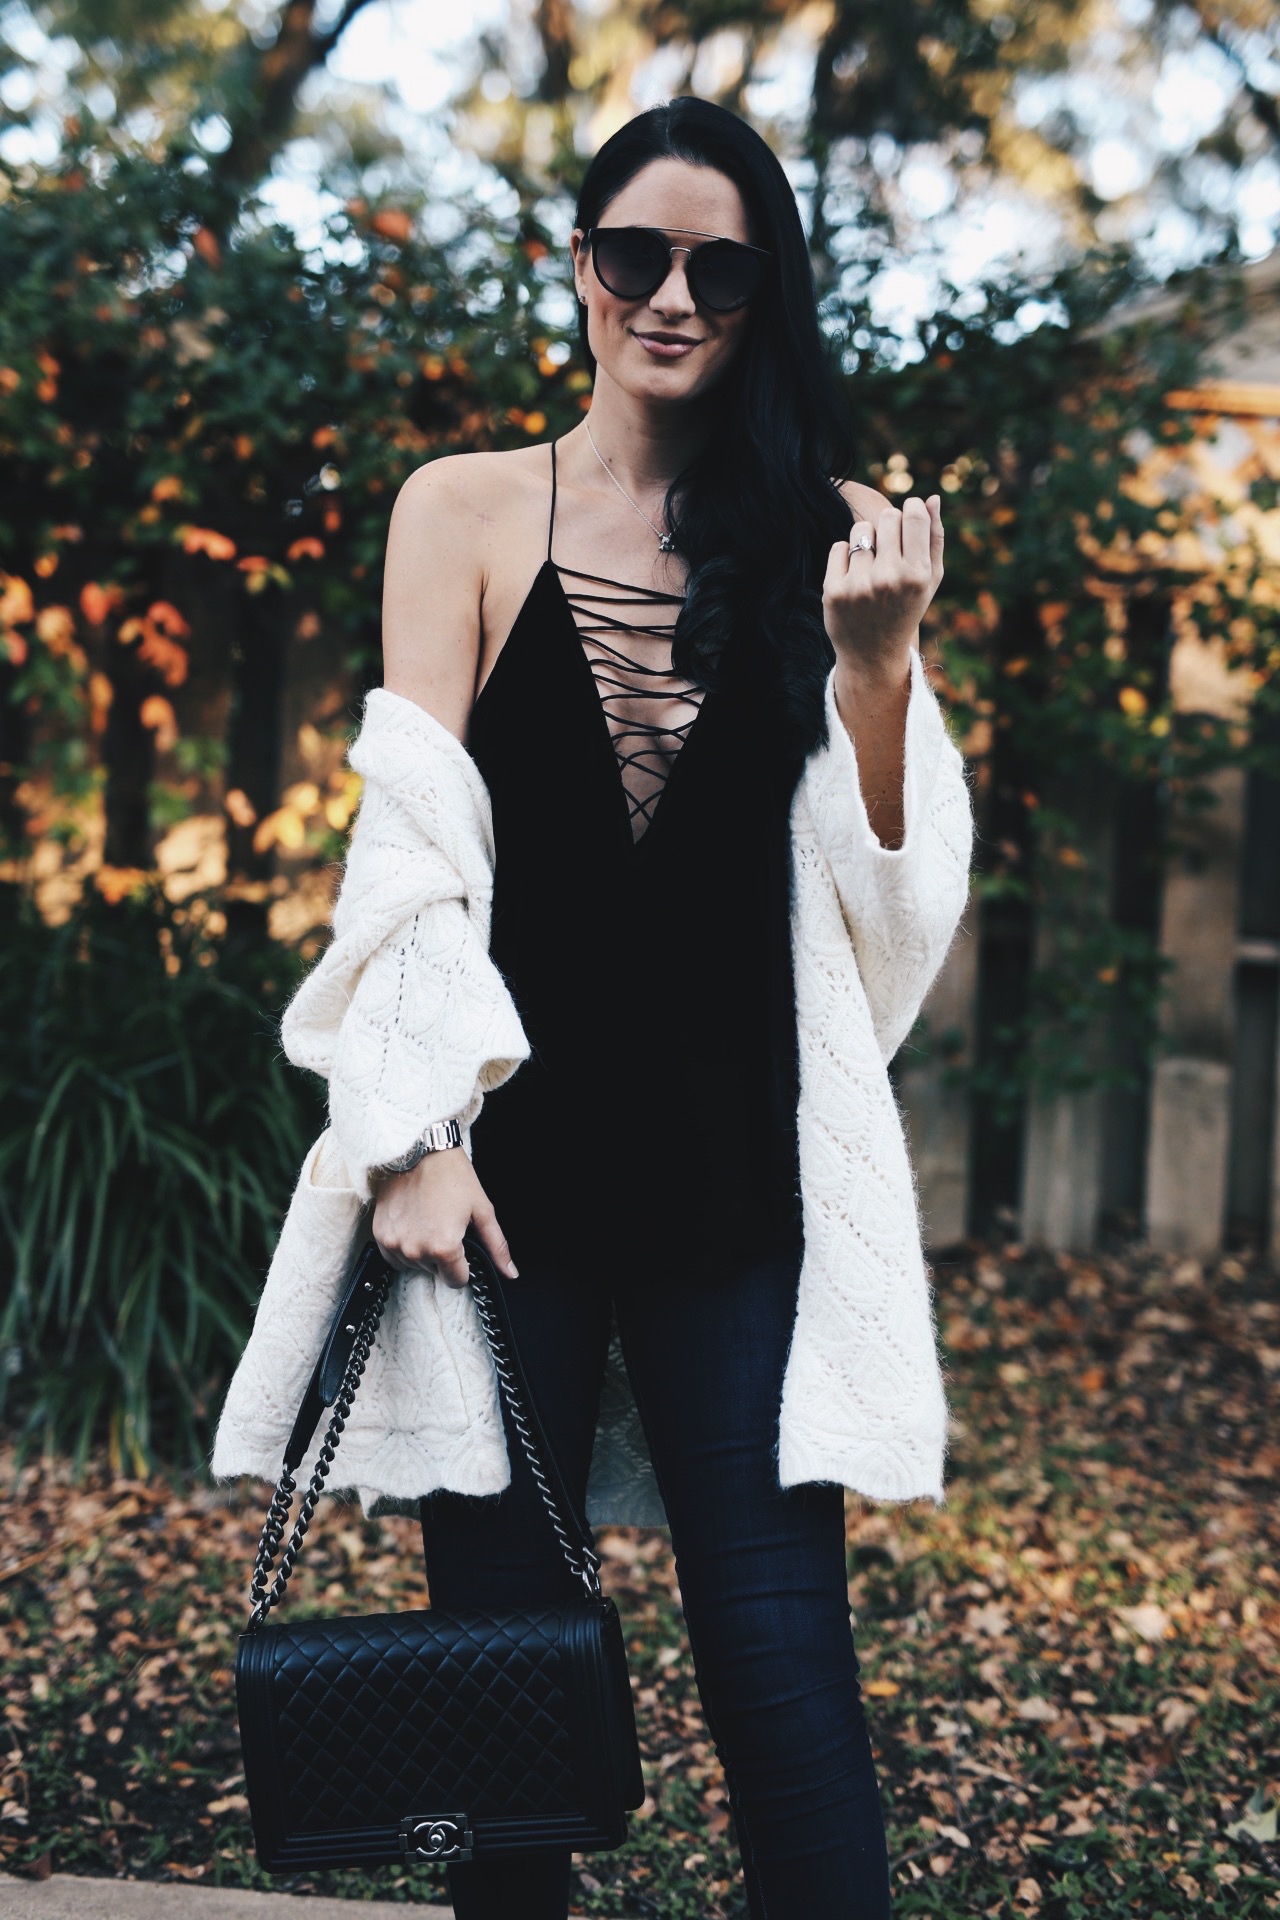 DTKAustin has rounded up her top cardigans for Fall and Winter that are under $100 from Chicwish. | how to style a cardigan | how to wear a cardigan | cardigan fashion ideas | cardigan style tips | white cardigan style | fall fashion tips | fall outfit ideas | fall style tips | what to wear for fall | cool weather fashion | fashion for fall | style tips for fall | outfit ideas for fall || Dressed to Kill #fallstyle #whitecardigan #cardigan 